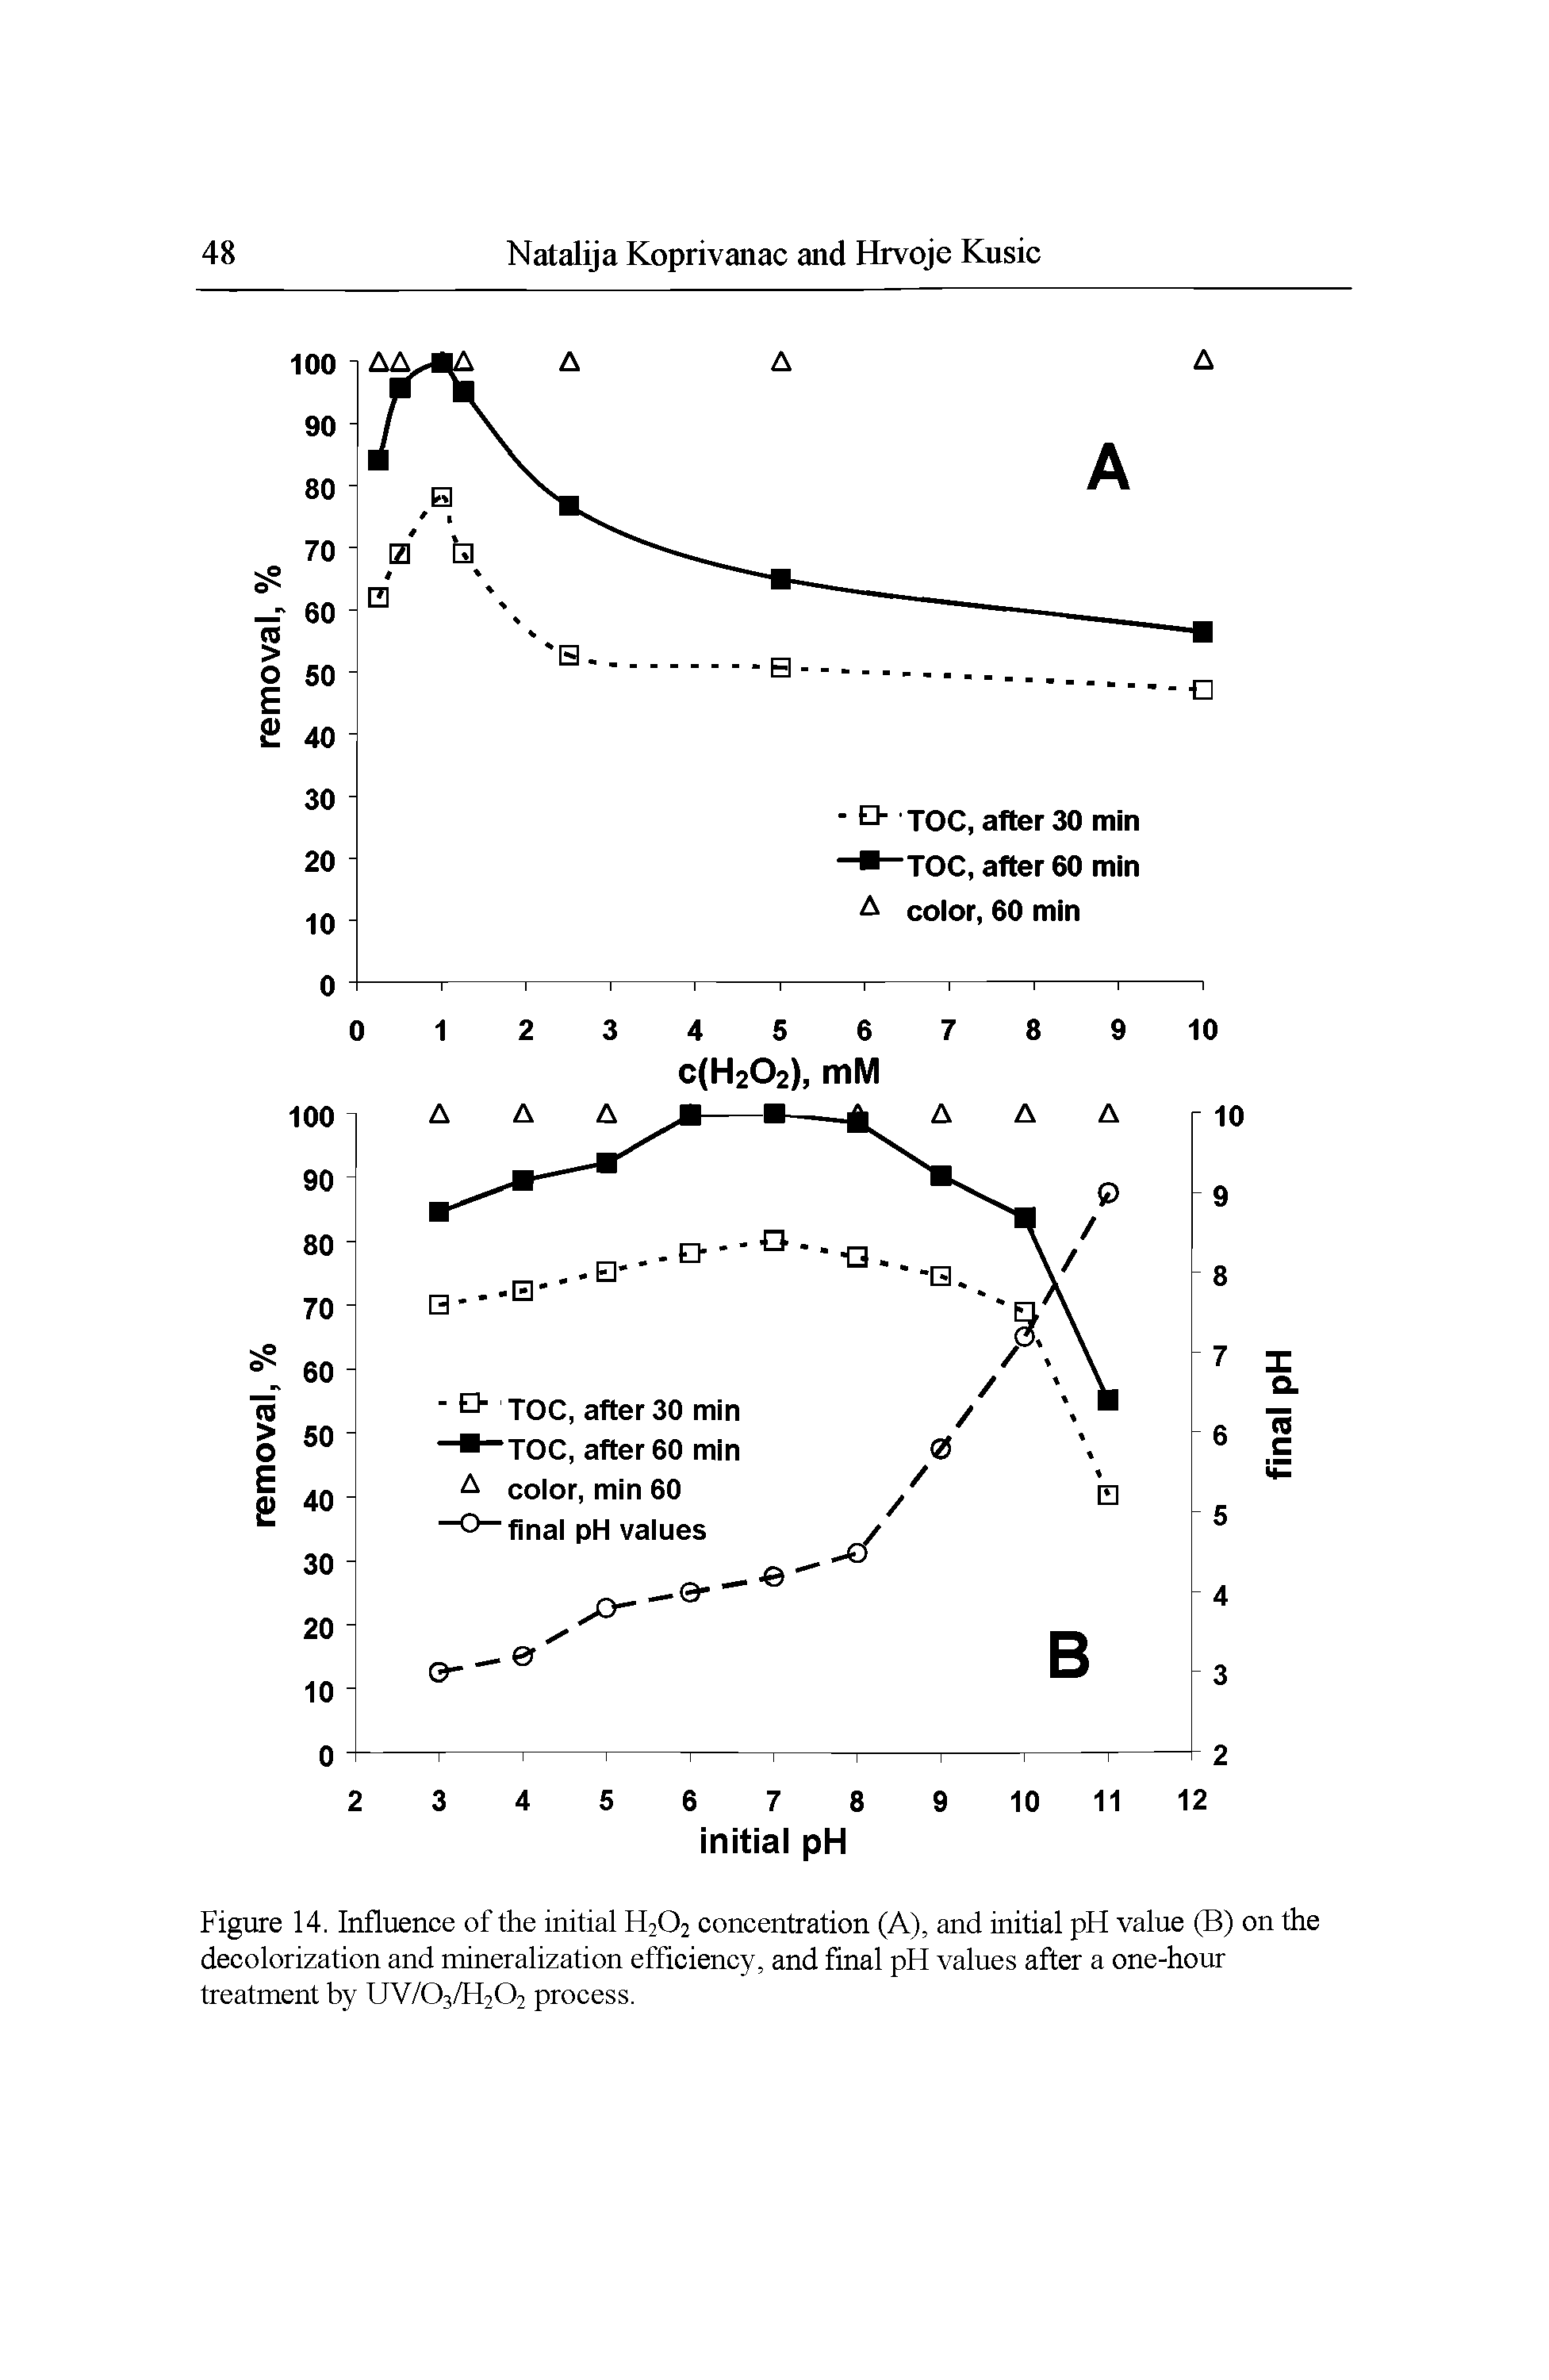 Figure 14. Influence of the initial H2O2 concentration (A), and initial pH value (B) on the decolorization and mineralization efficiency, and final pH values after a one-hour treatment by UV/O3/H2O2 process.